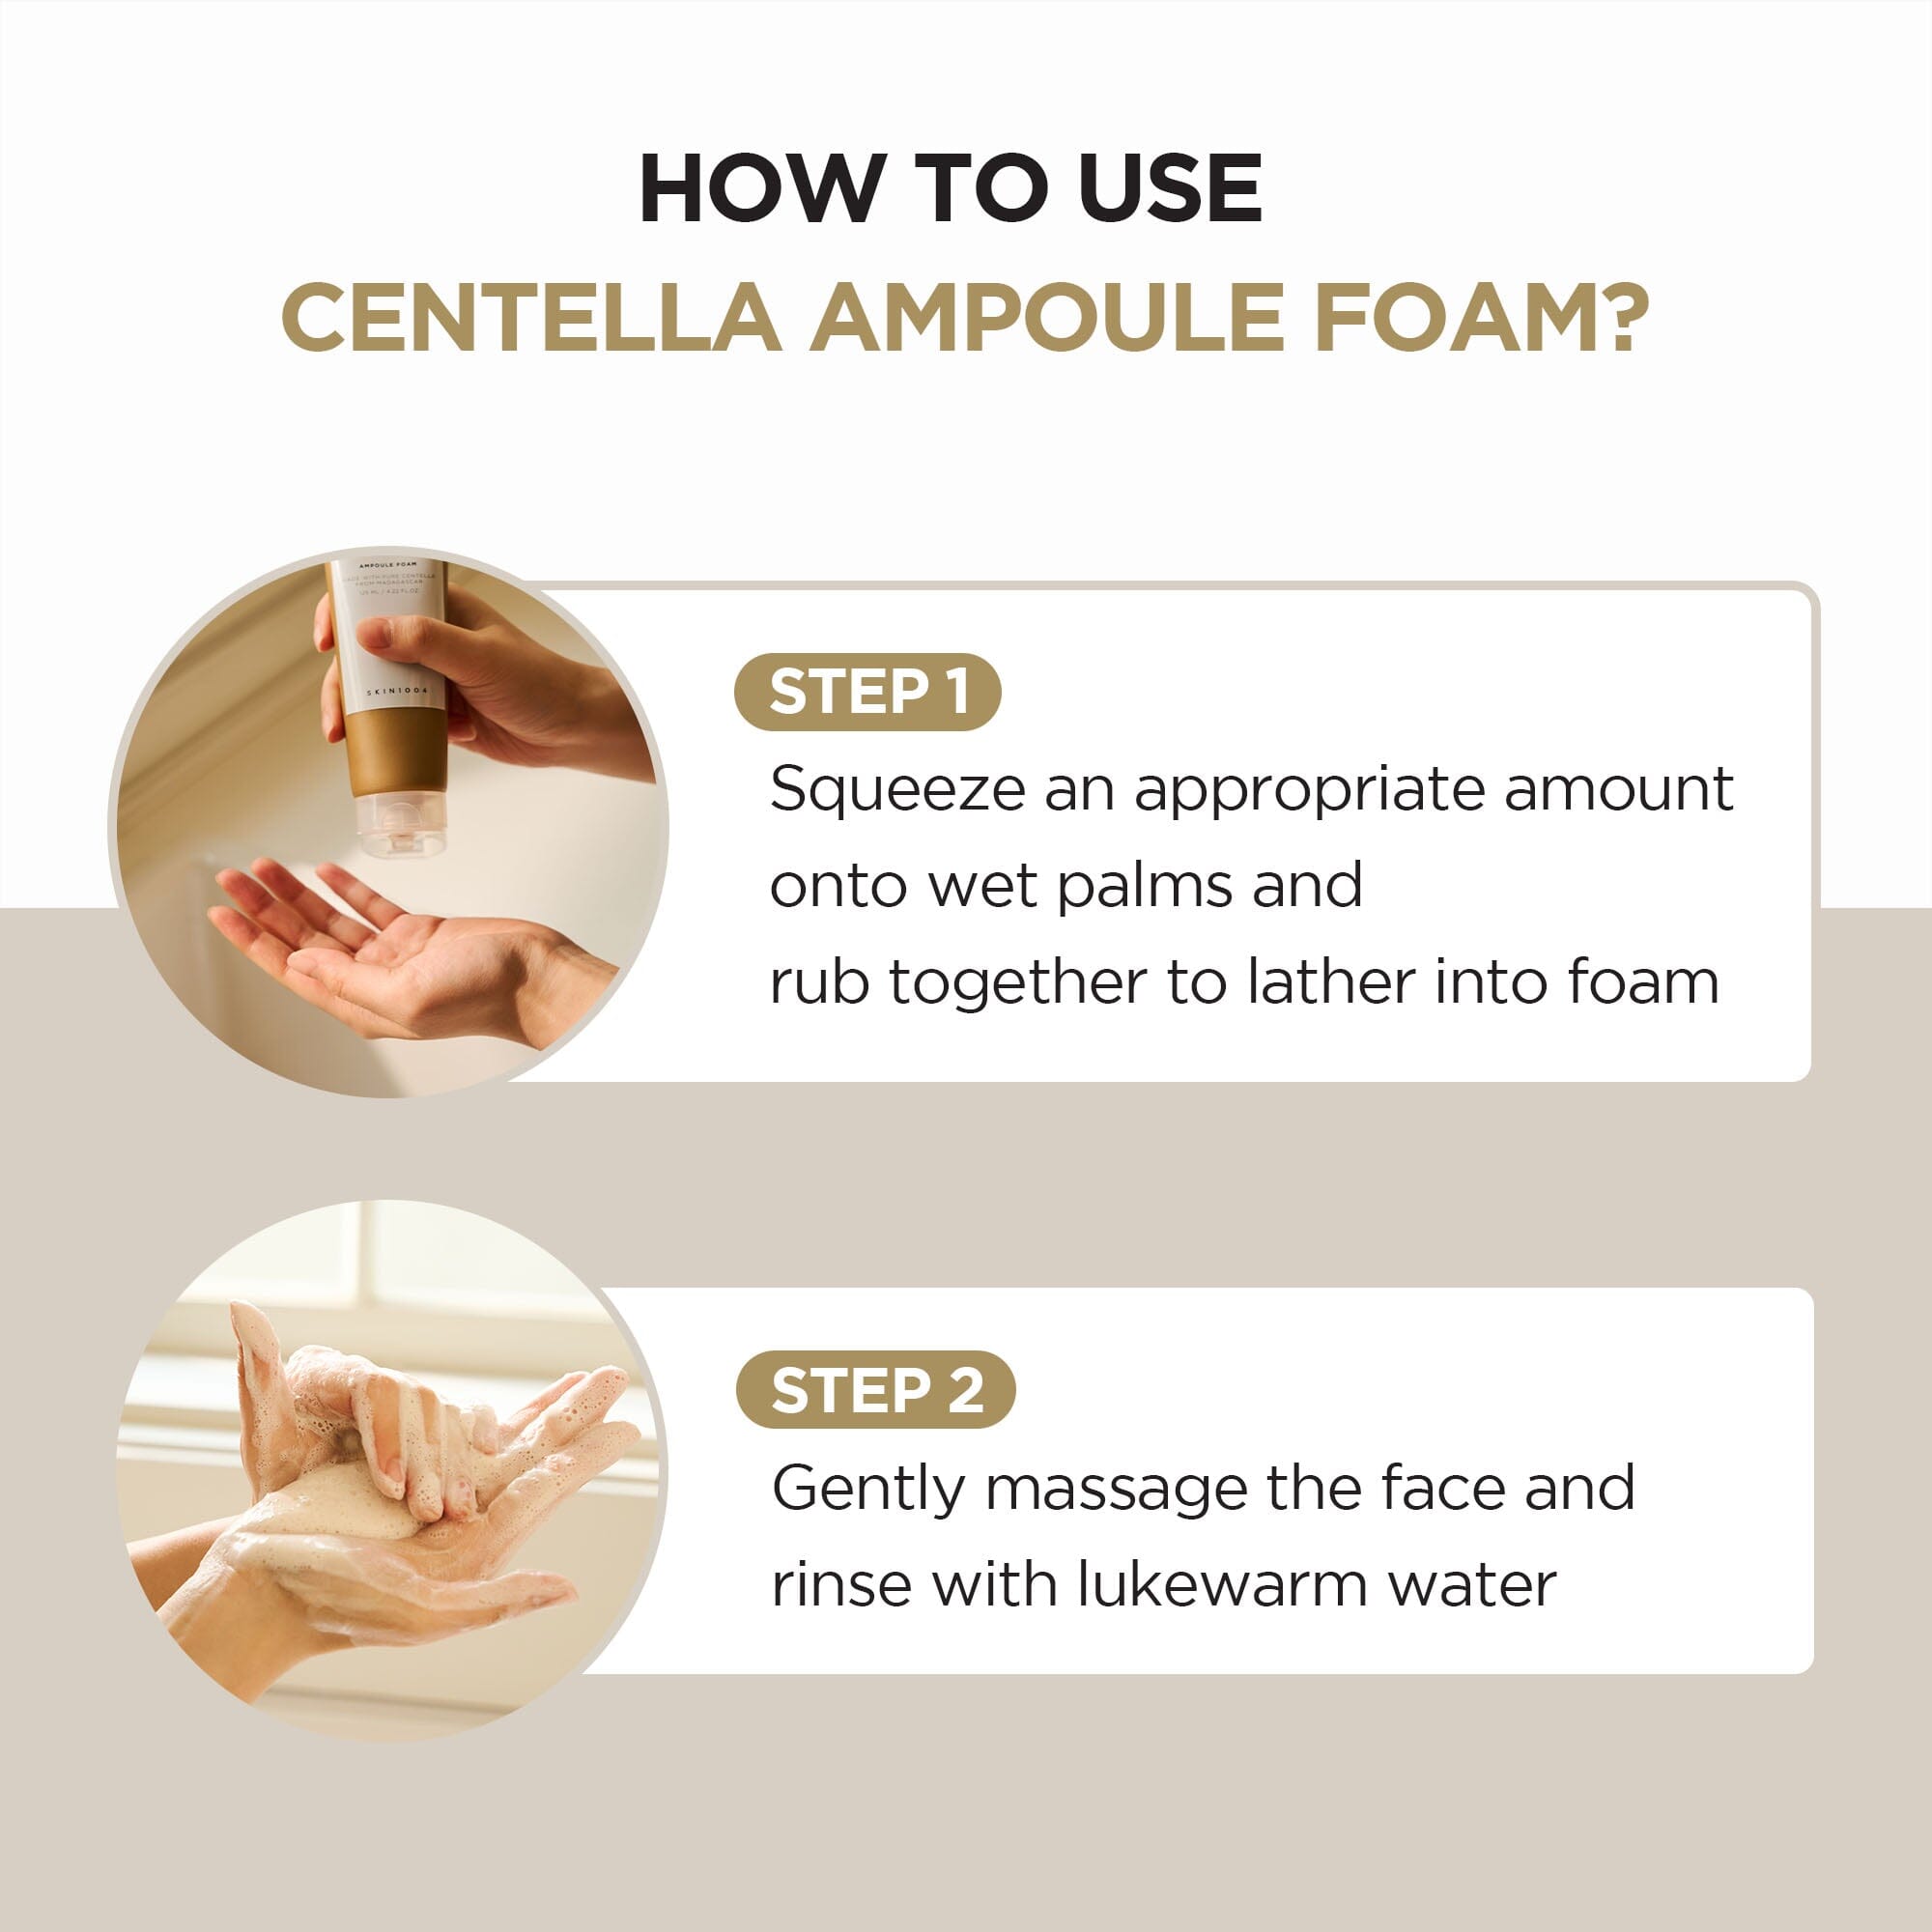 SKIN1004 Madagascar Centella Ampoule Foam 125ml, at Orion Beauty. SKIN1004 Official Sole Authorized Retailer in Sri Lanka!